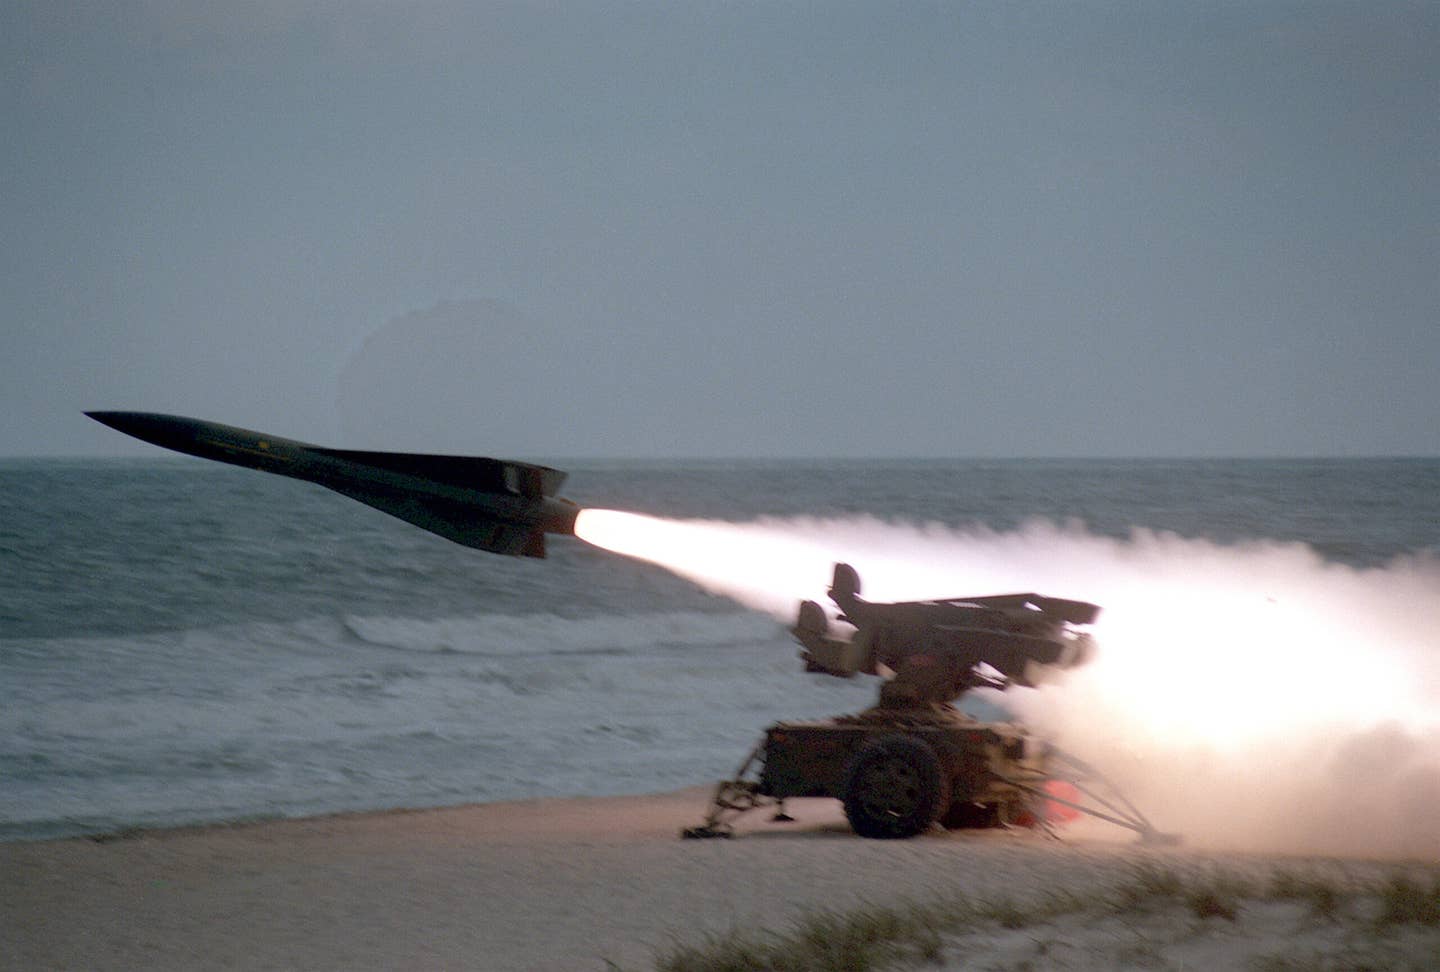 An MIM-23 HAWK missile is fired by the 3rd Light Anti-aircraft Missile Battalion during a training exercise. <em>Credit: CPL. C. COPE/Wikimedia Commons</em>